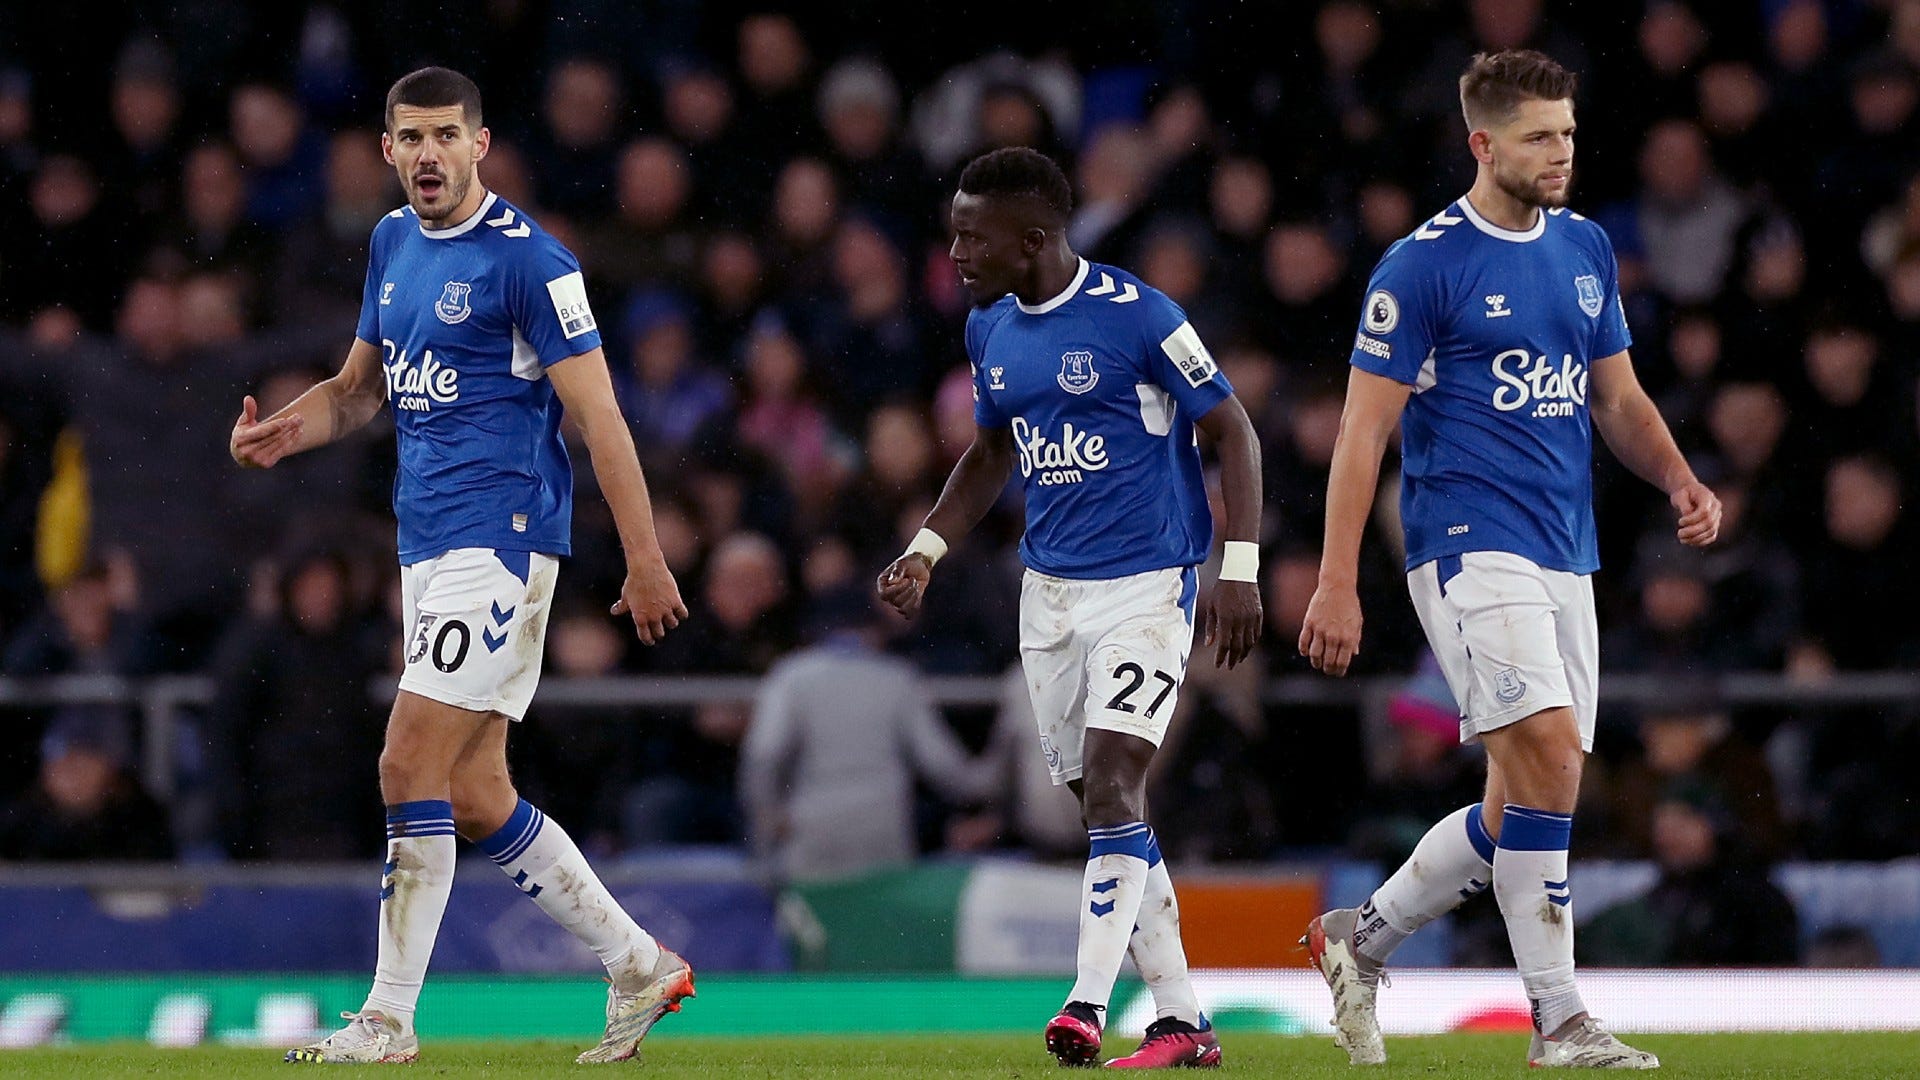 Everton vs Fulham Where to watch the match online, live stream, TV channels and kick-off time Goal UK